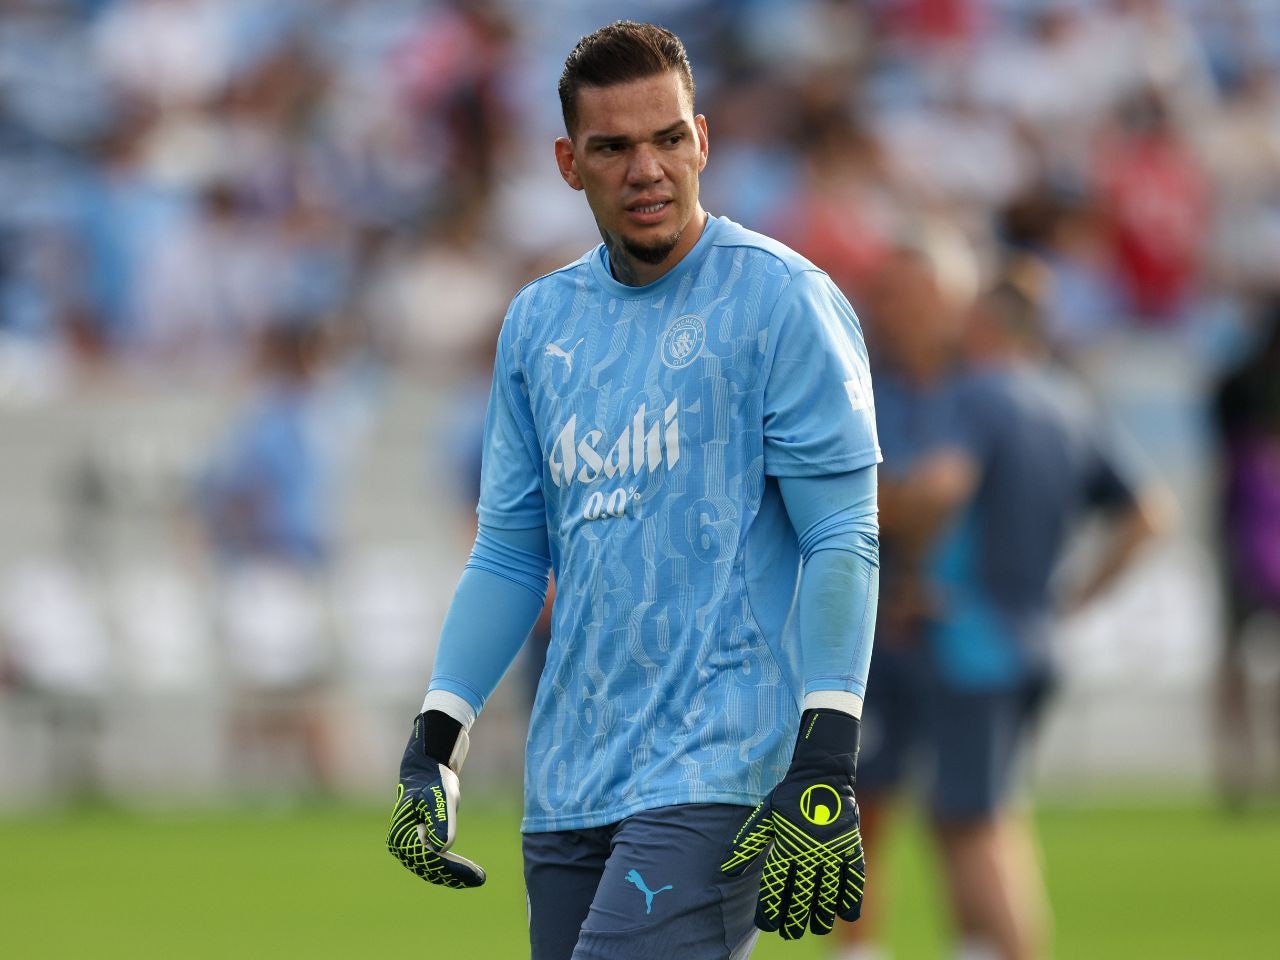 Ederson slams claims that he was 'affected' by praise for Man City teammate